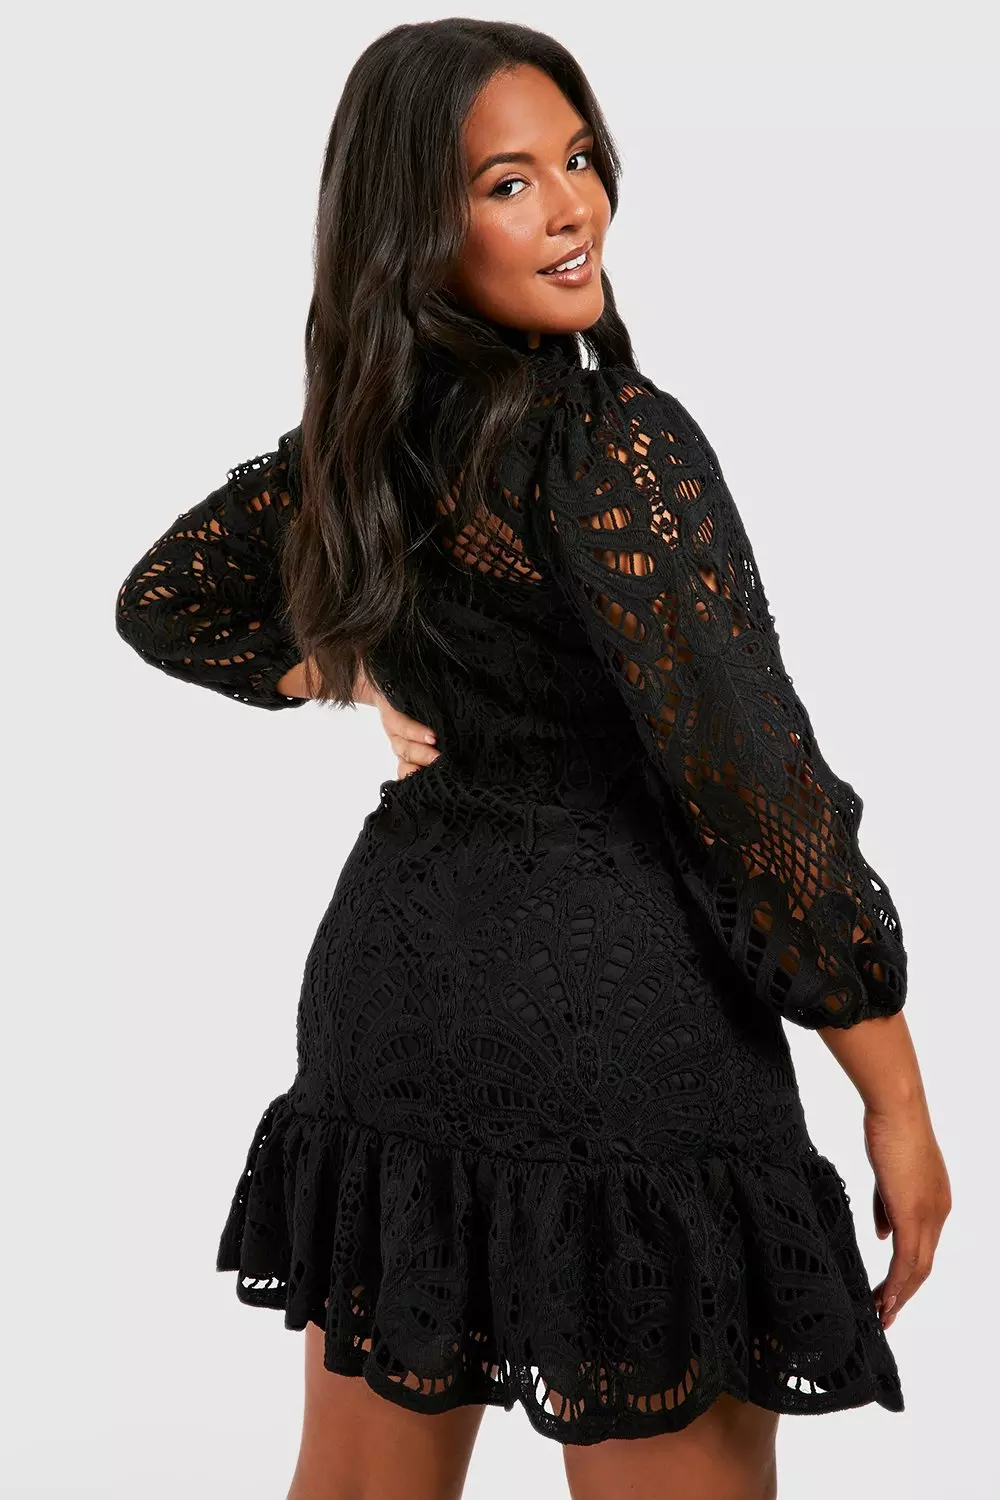 Premium Photo  Model wears a black lace dress with a black lace top and  black skirt.